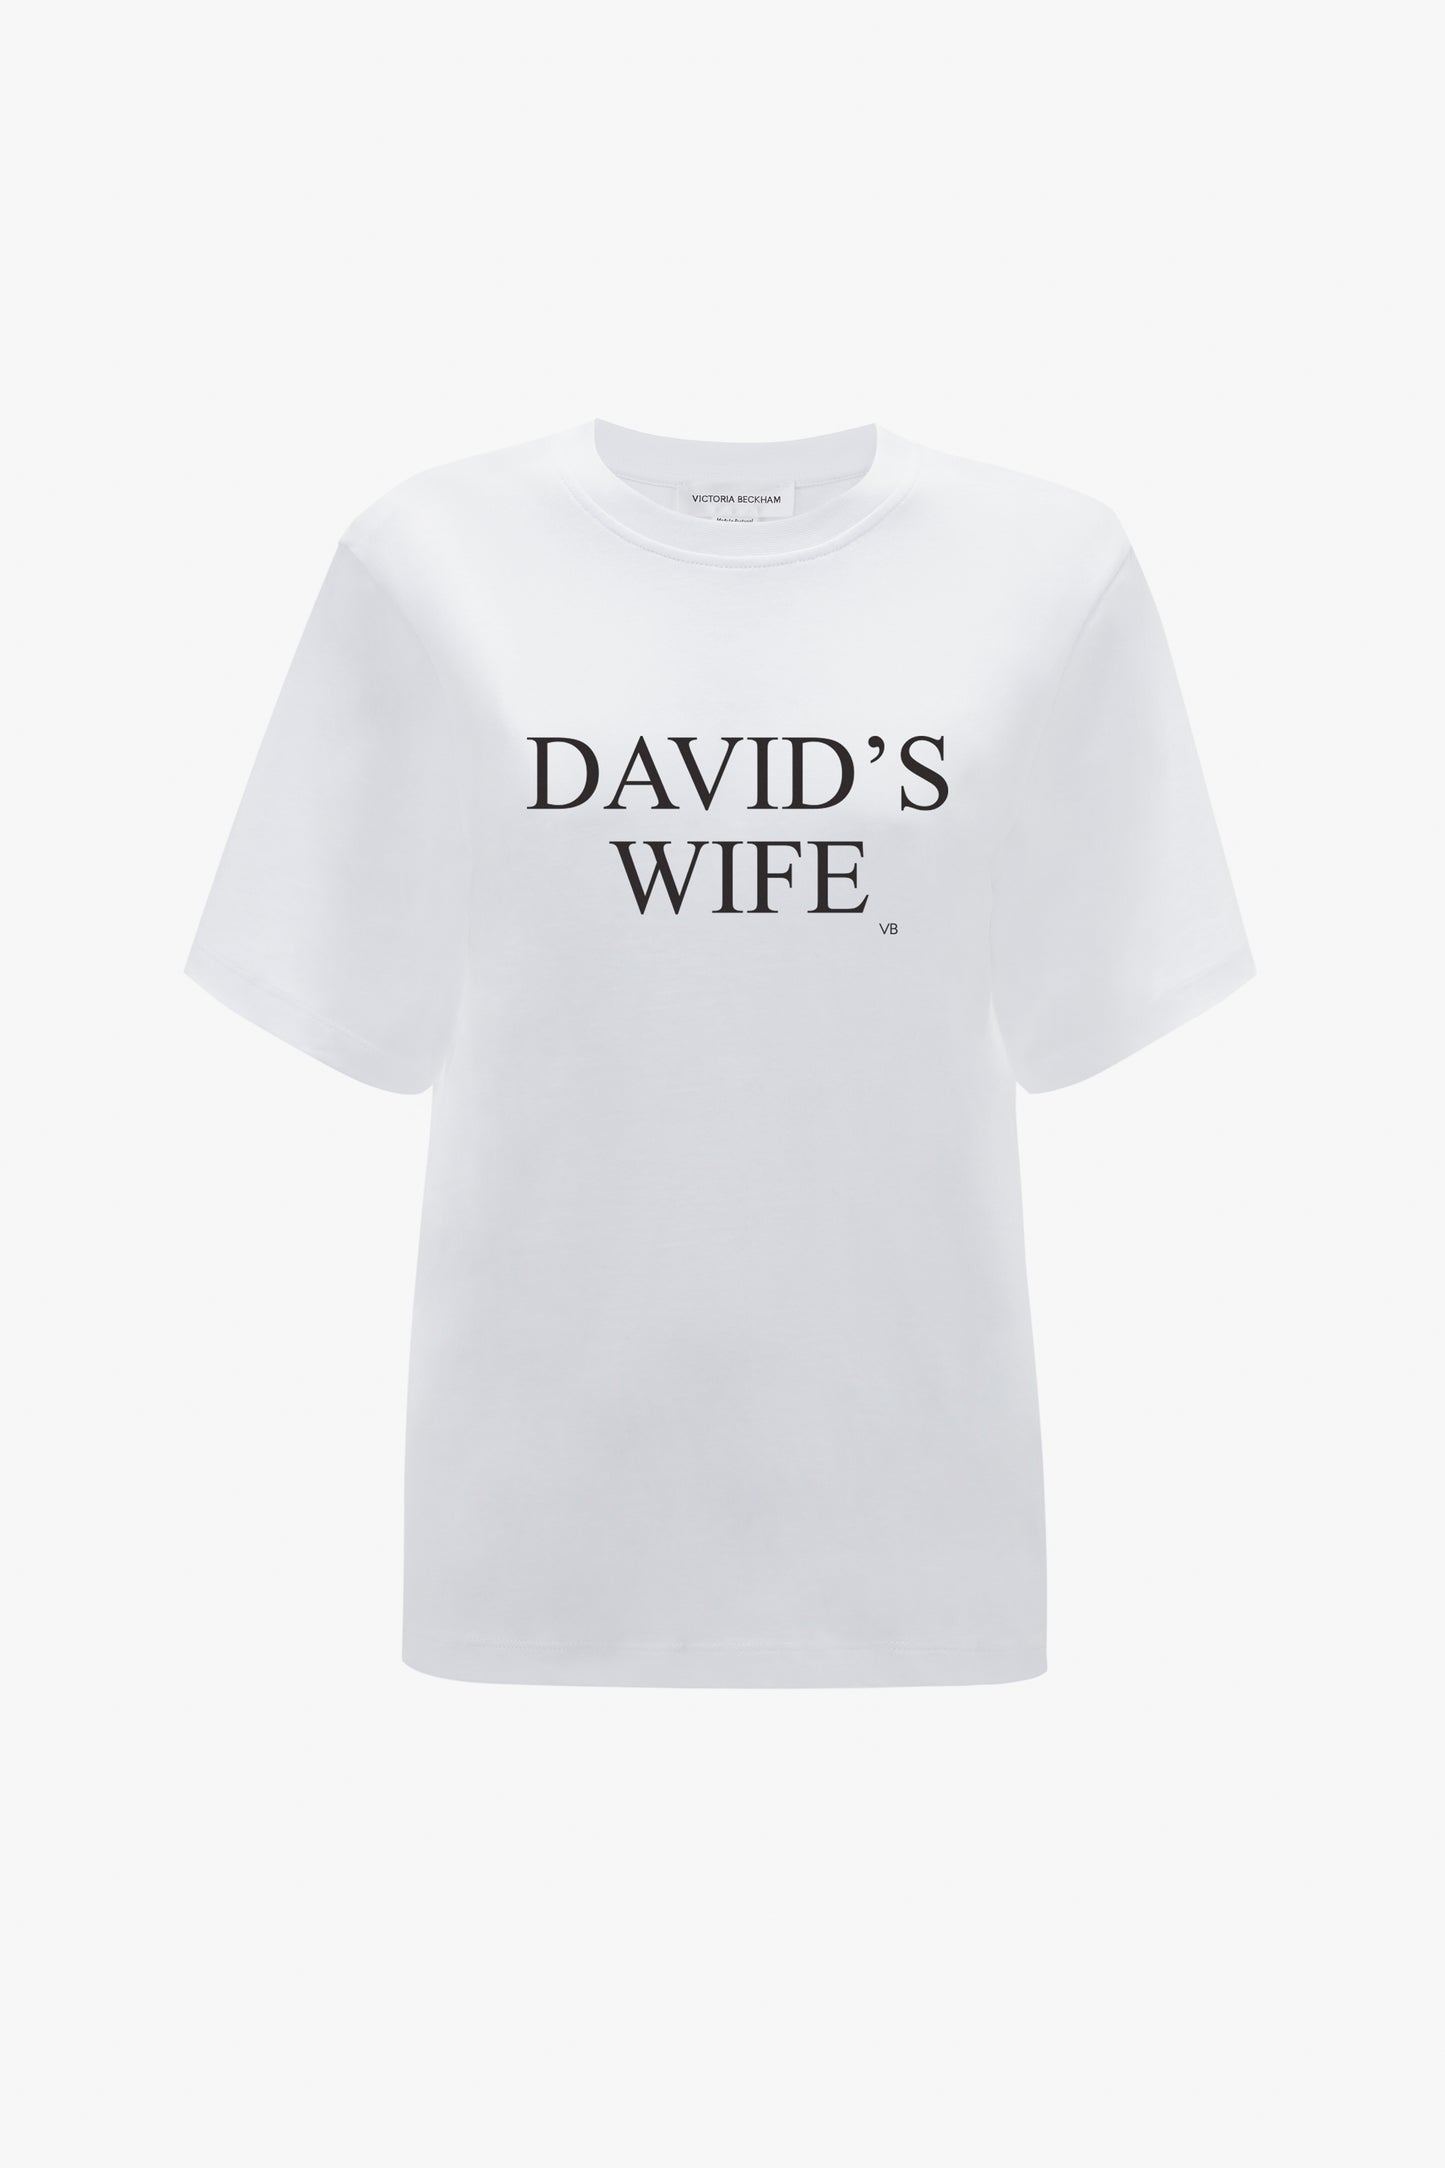 Victoria Beckham's 'David's Wife' Slogan T-Shirt in White, made of organic cotton and featuring the phrase printed in black letters on the front, displayed on a plain background.